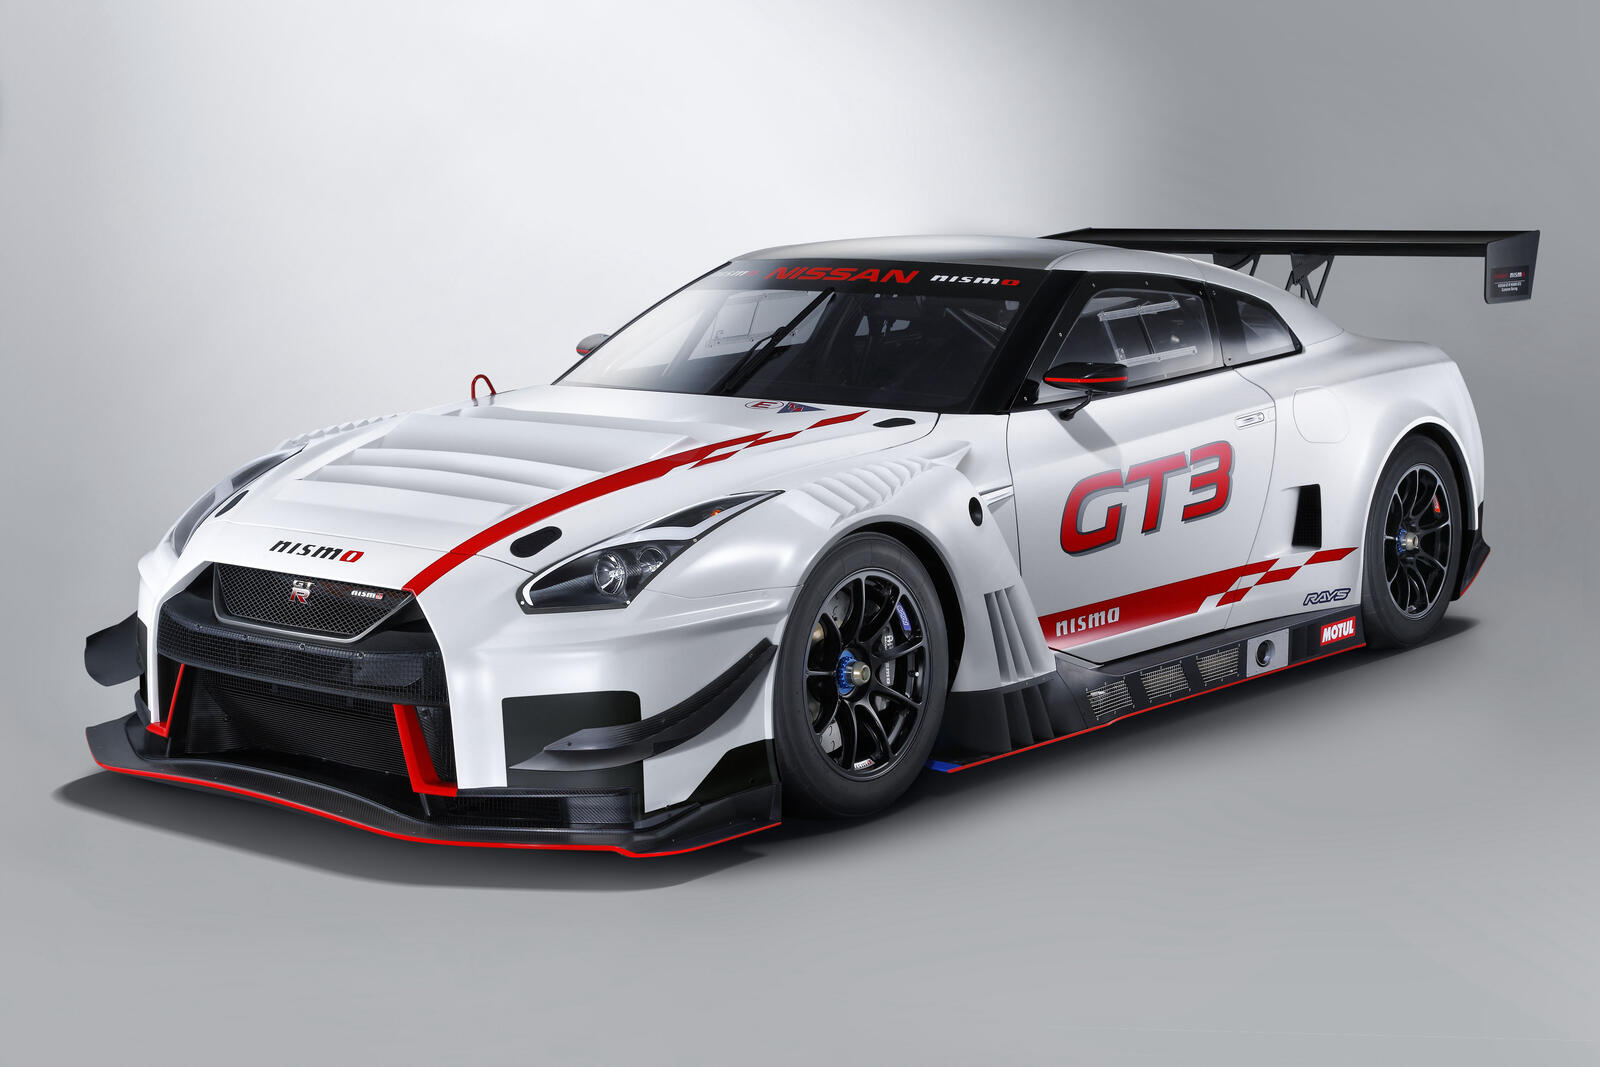 Free photo Wallpaper for computer with Nissan GTR